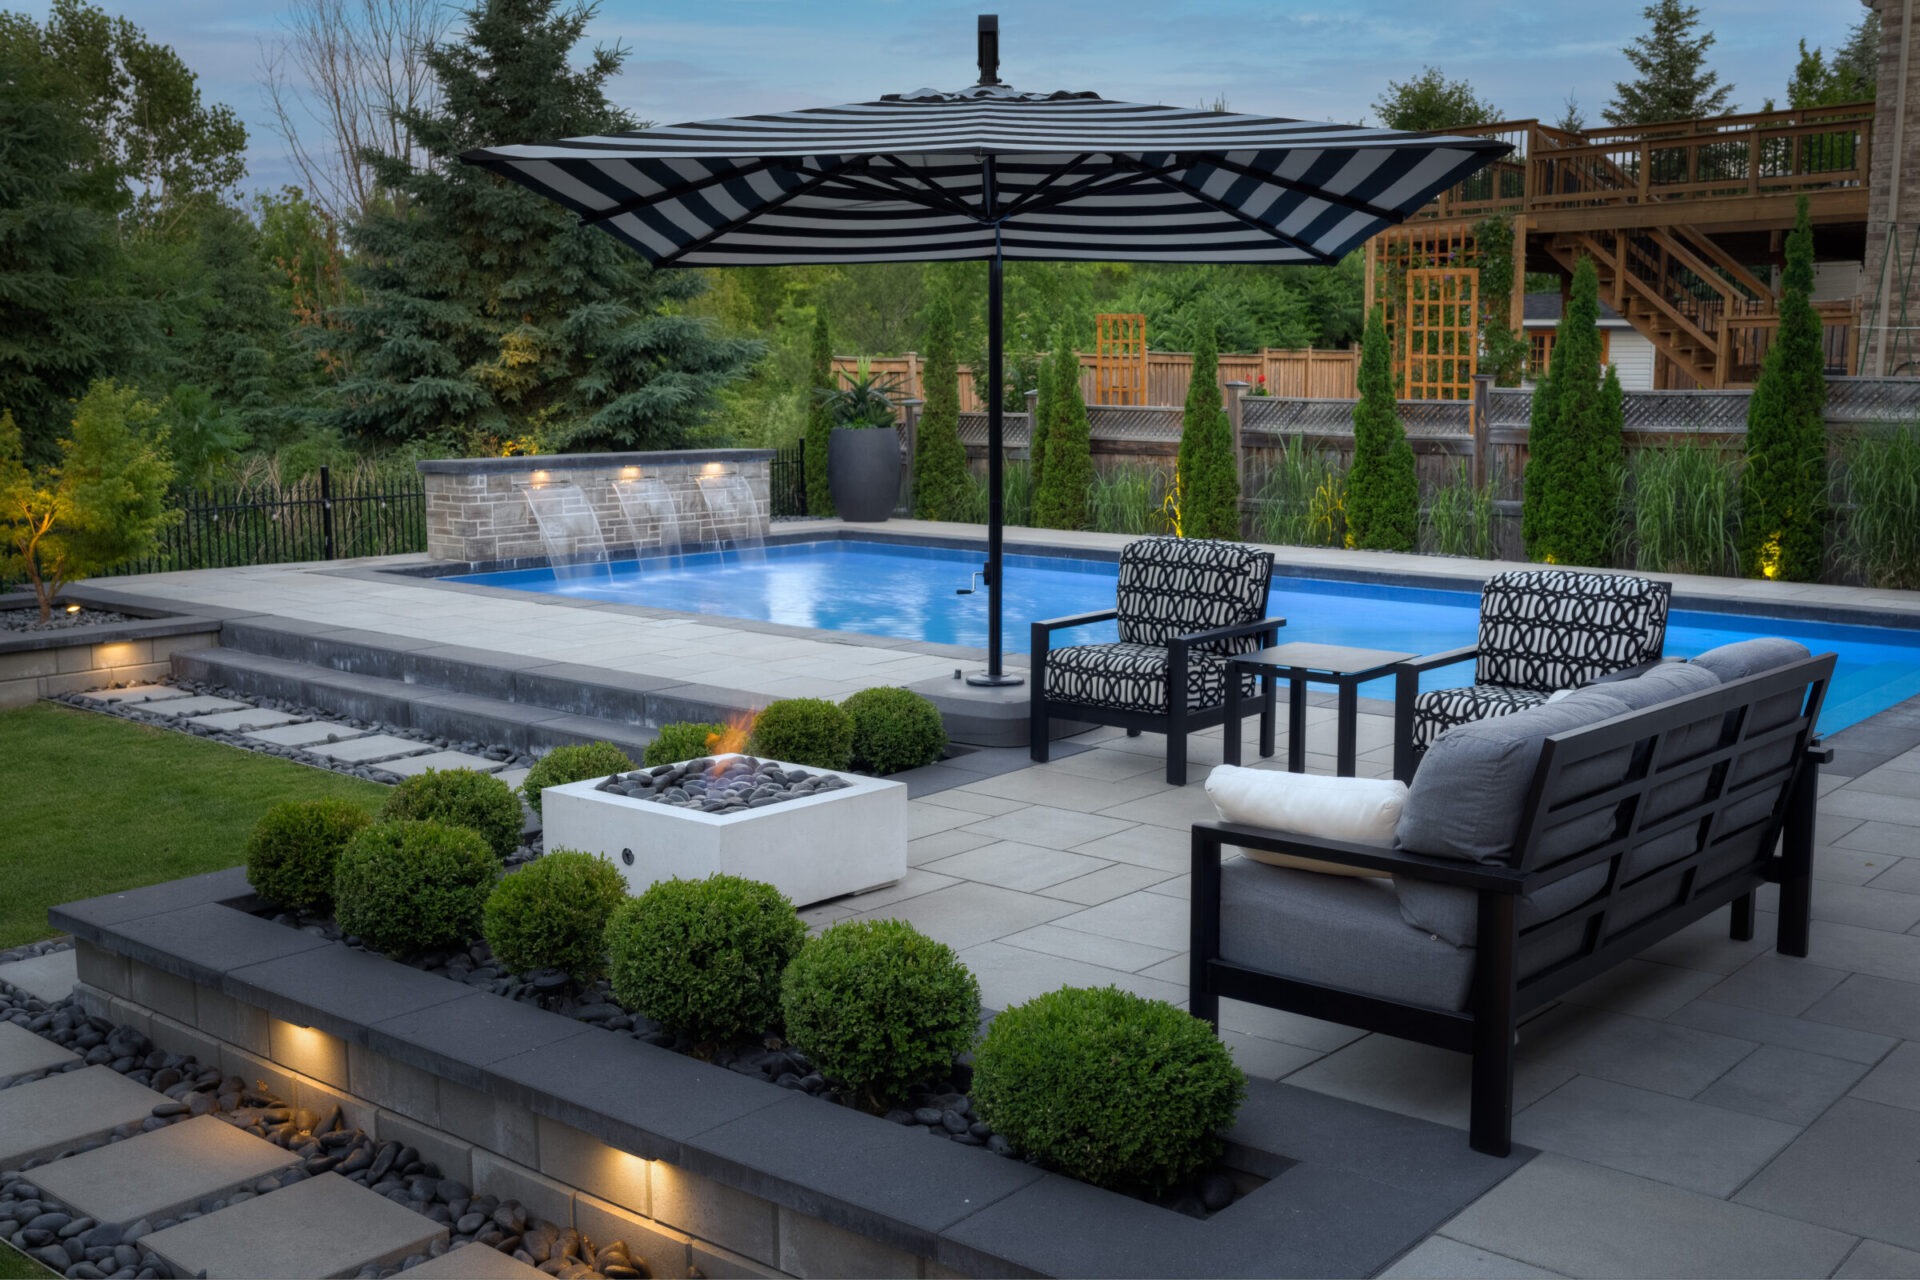 A luxurious backyard with an in-ground pool, stylish outdoor furniture, fire pit, lush greenery, and a striped umbrella at dusk. Elegant and peaceful ambiance.